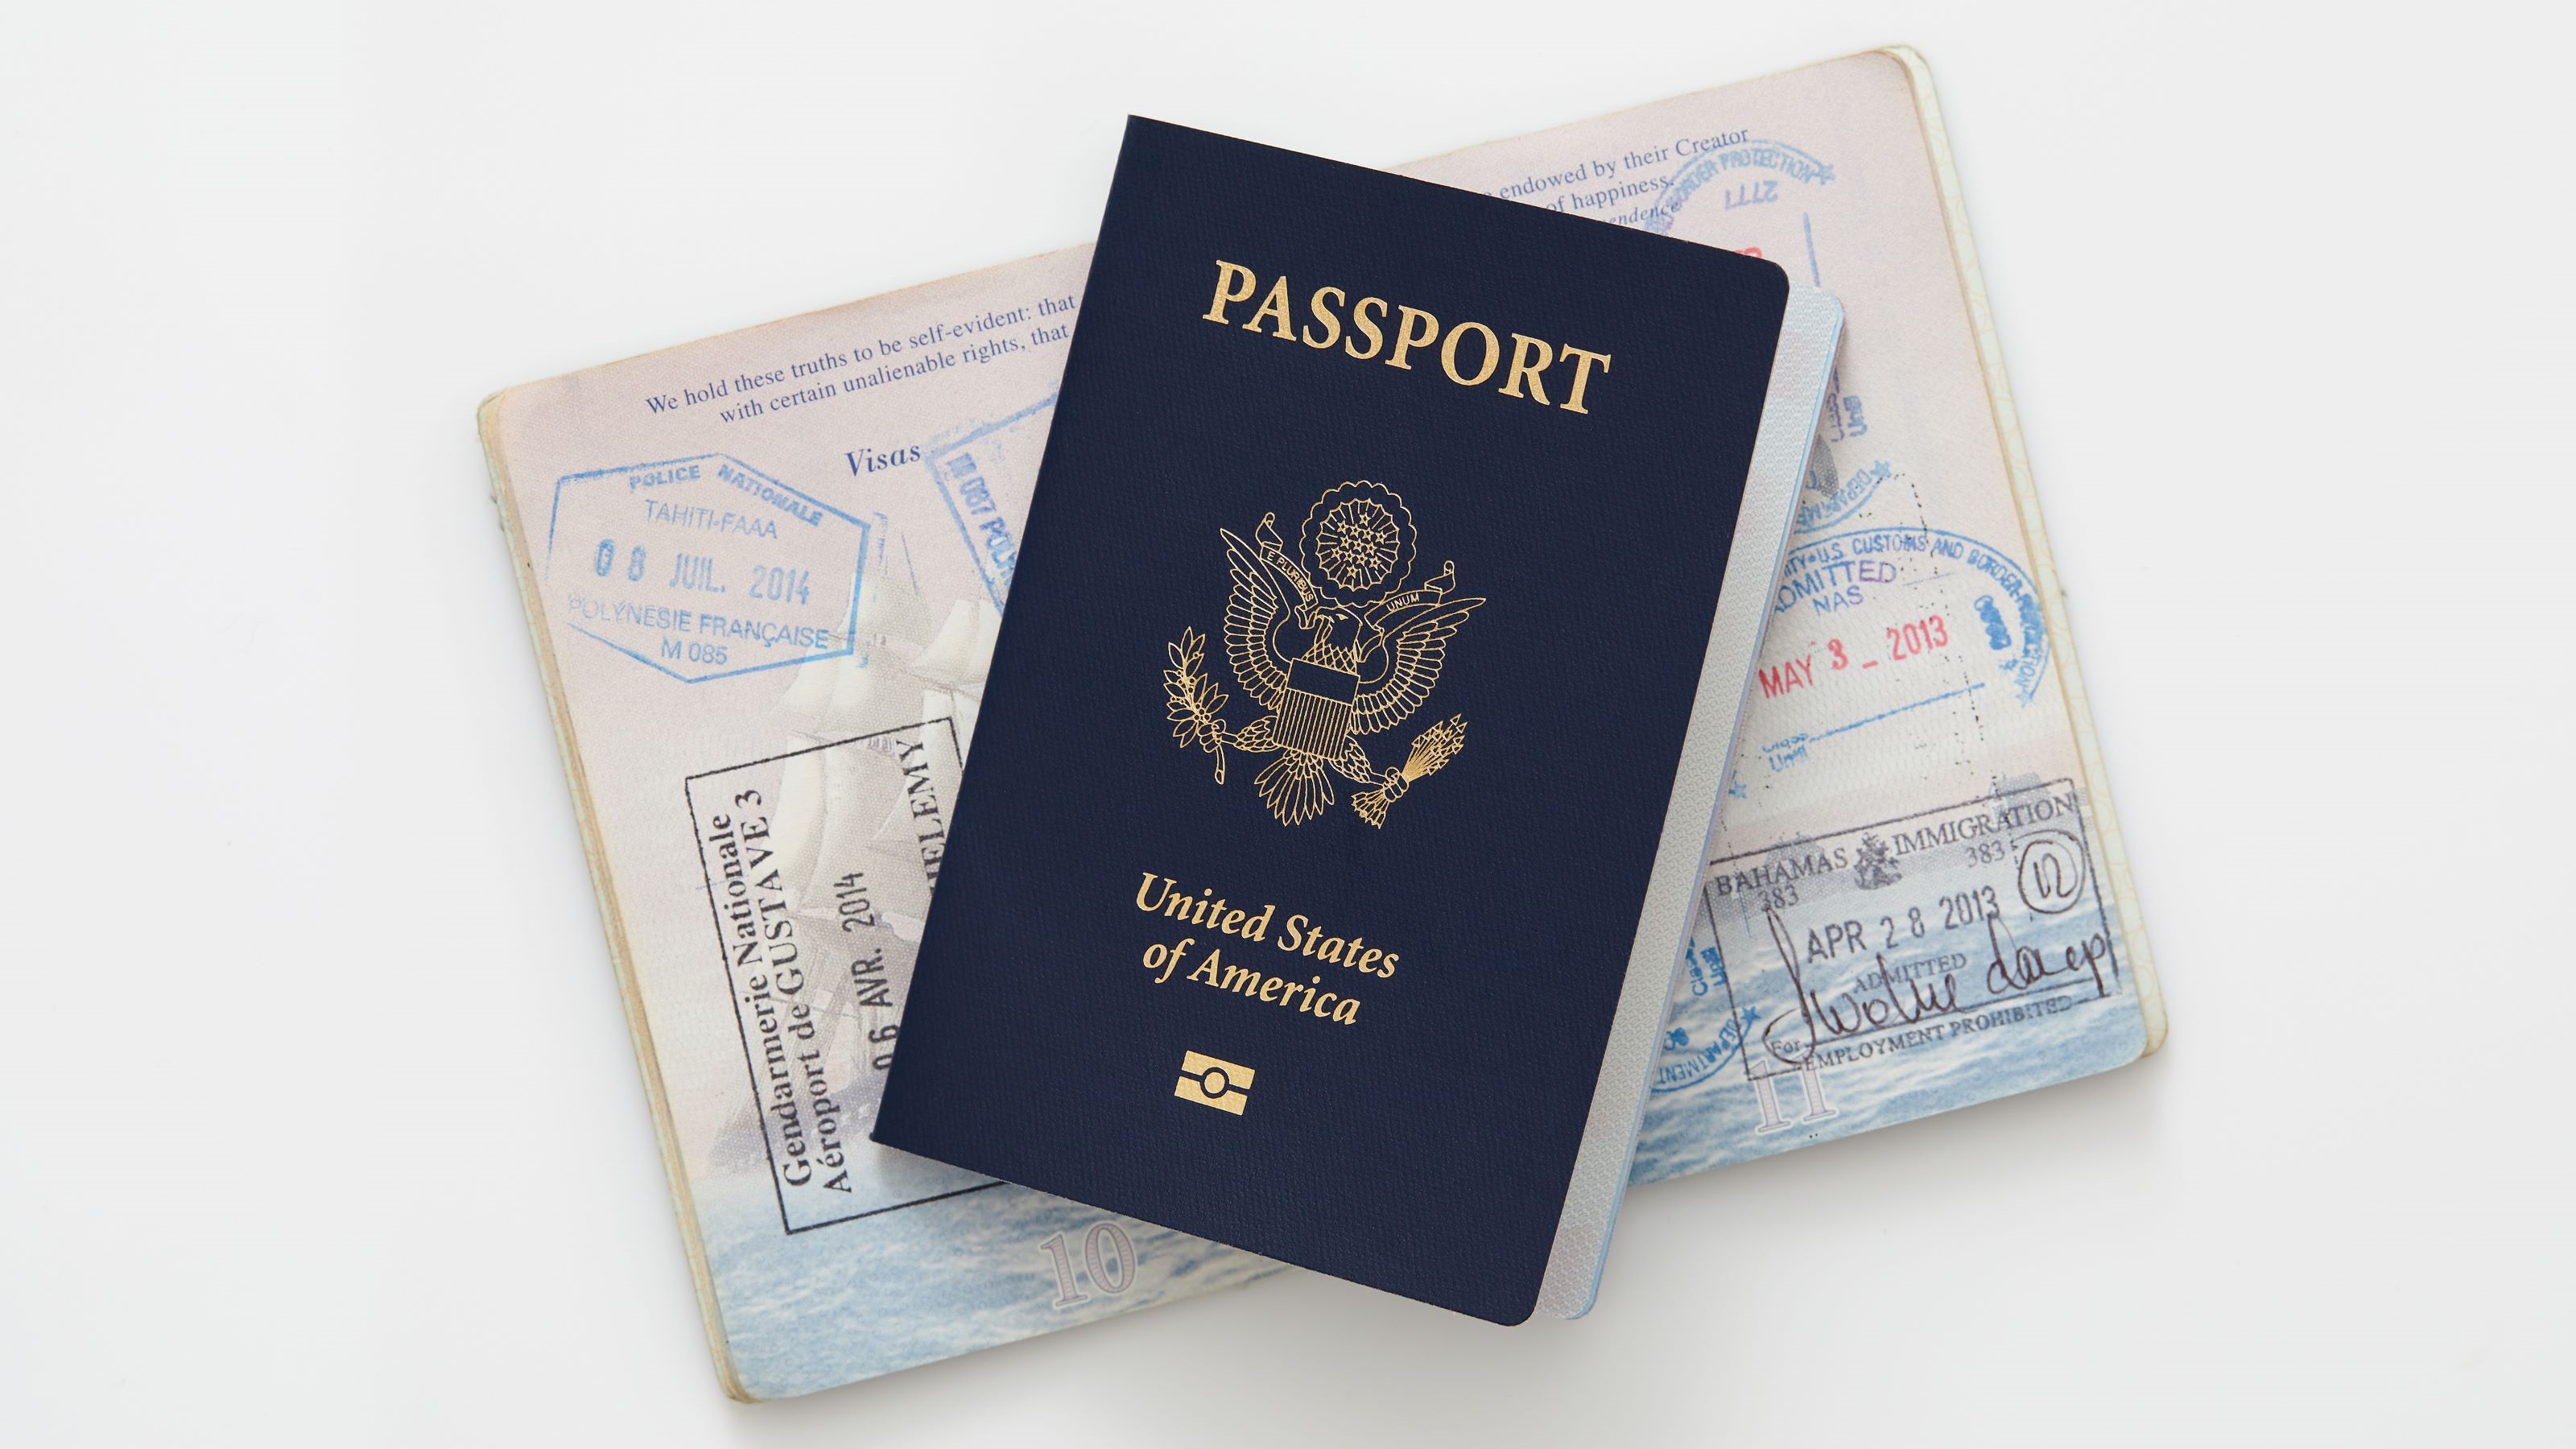 how long does it take for passport to renew